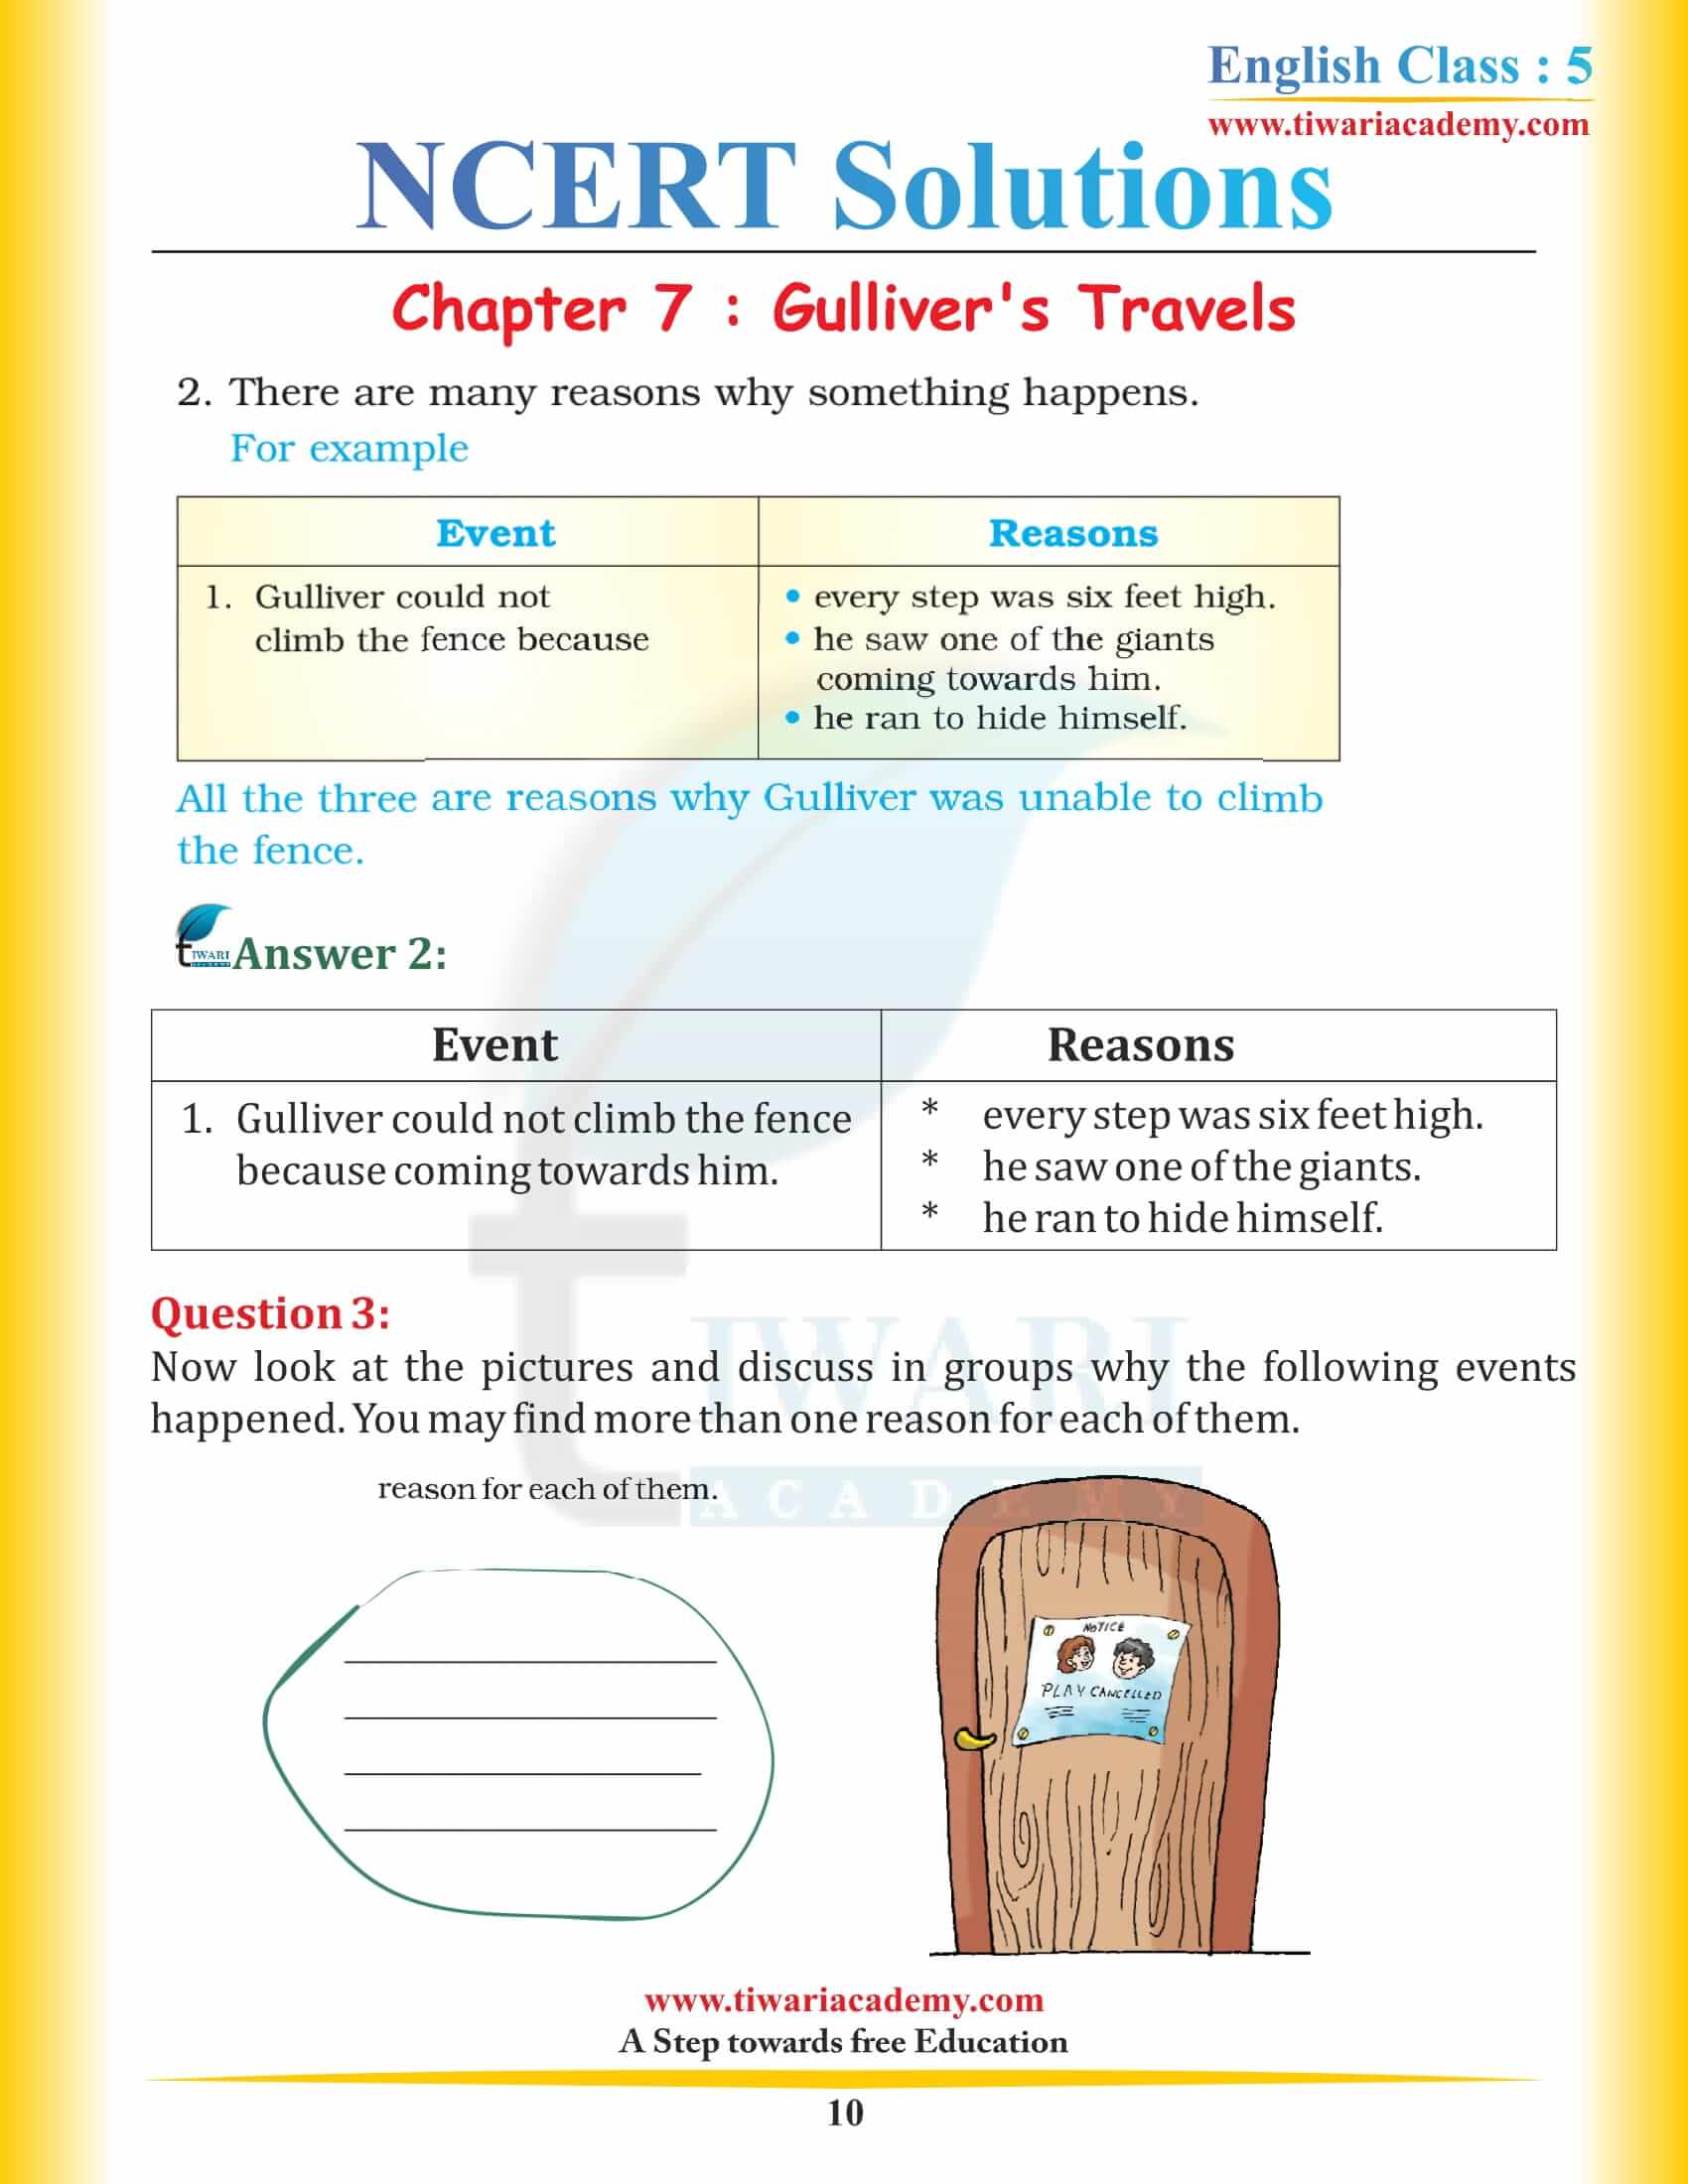 NCERT Solutions for Class 5 English Chapter 7 Gulliver’s Travels Free Download